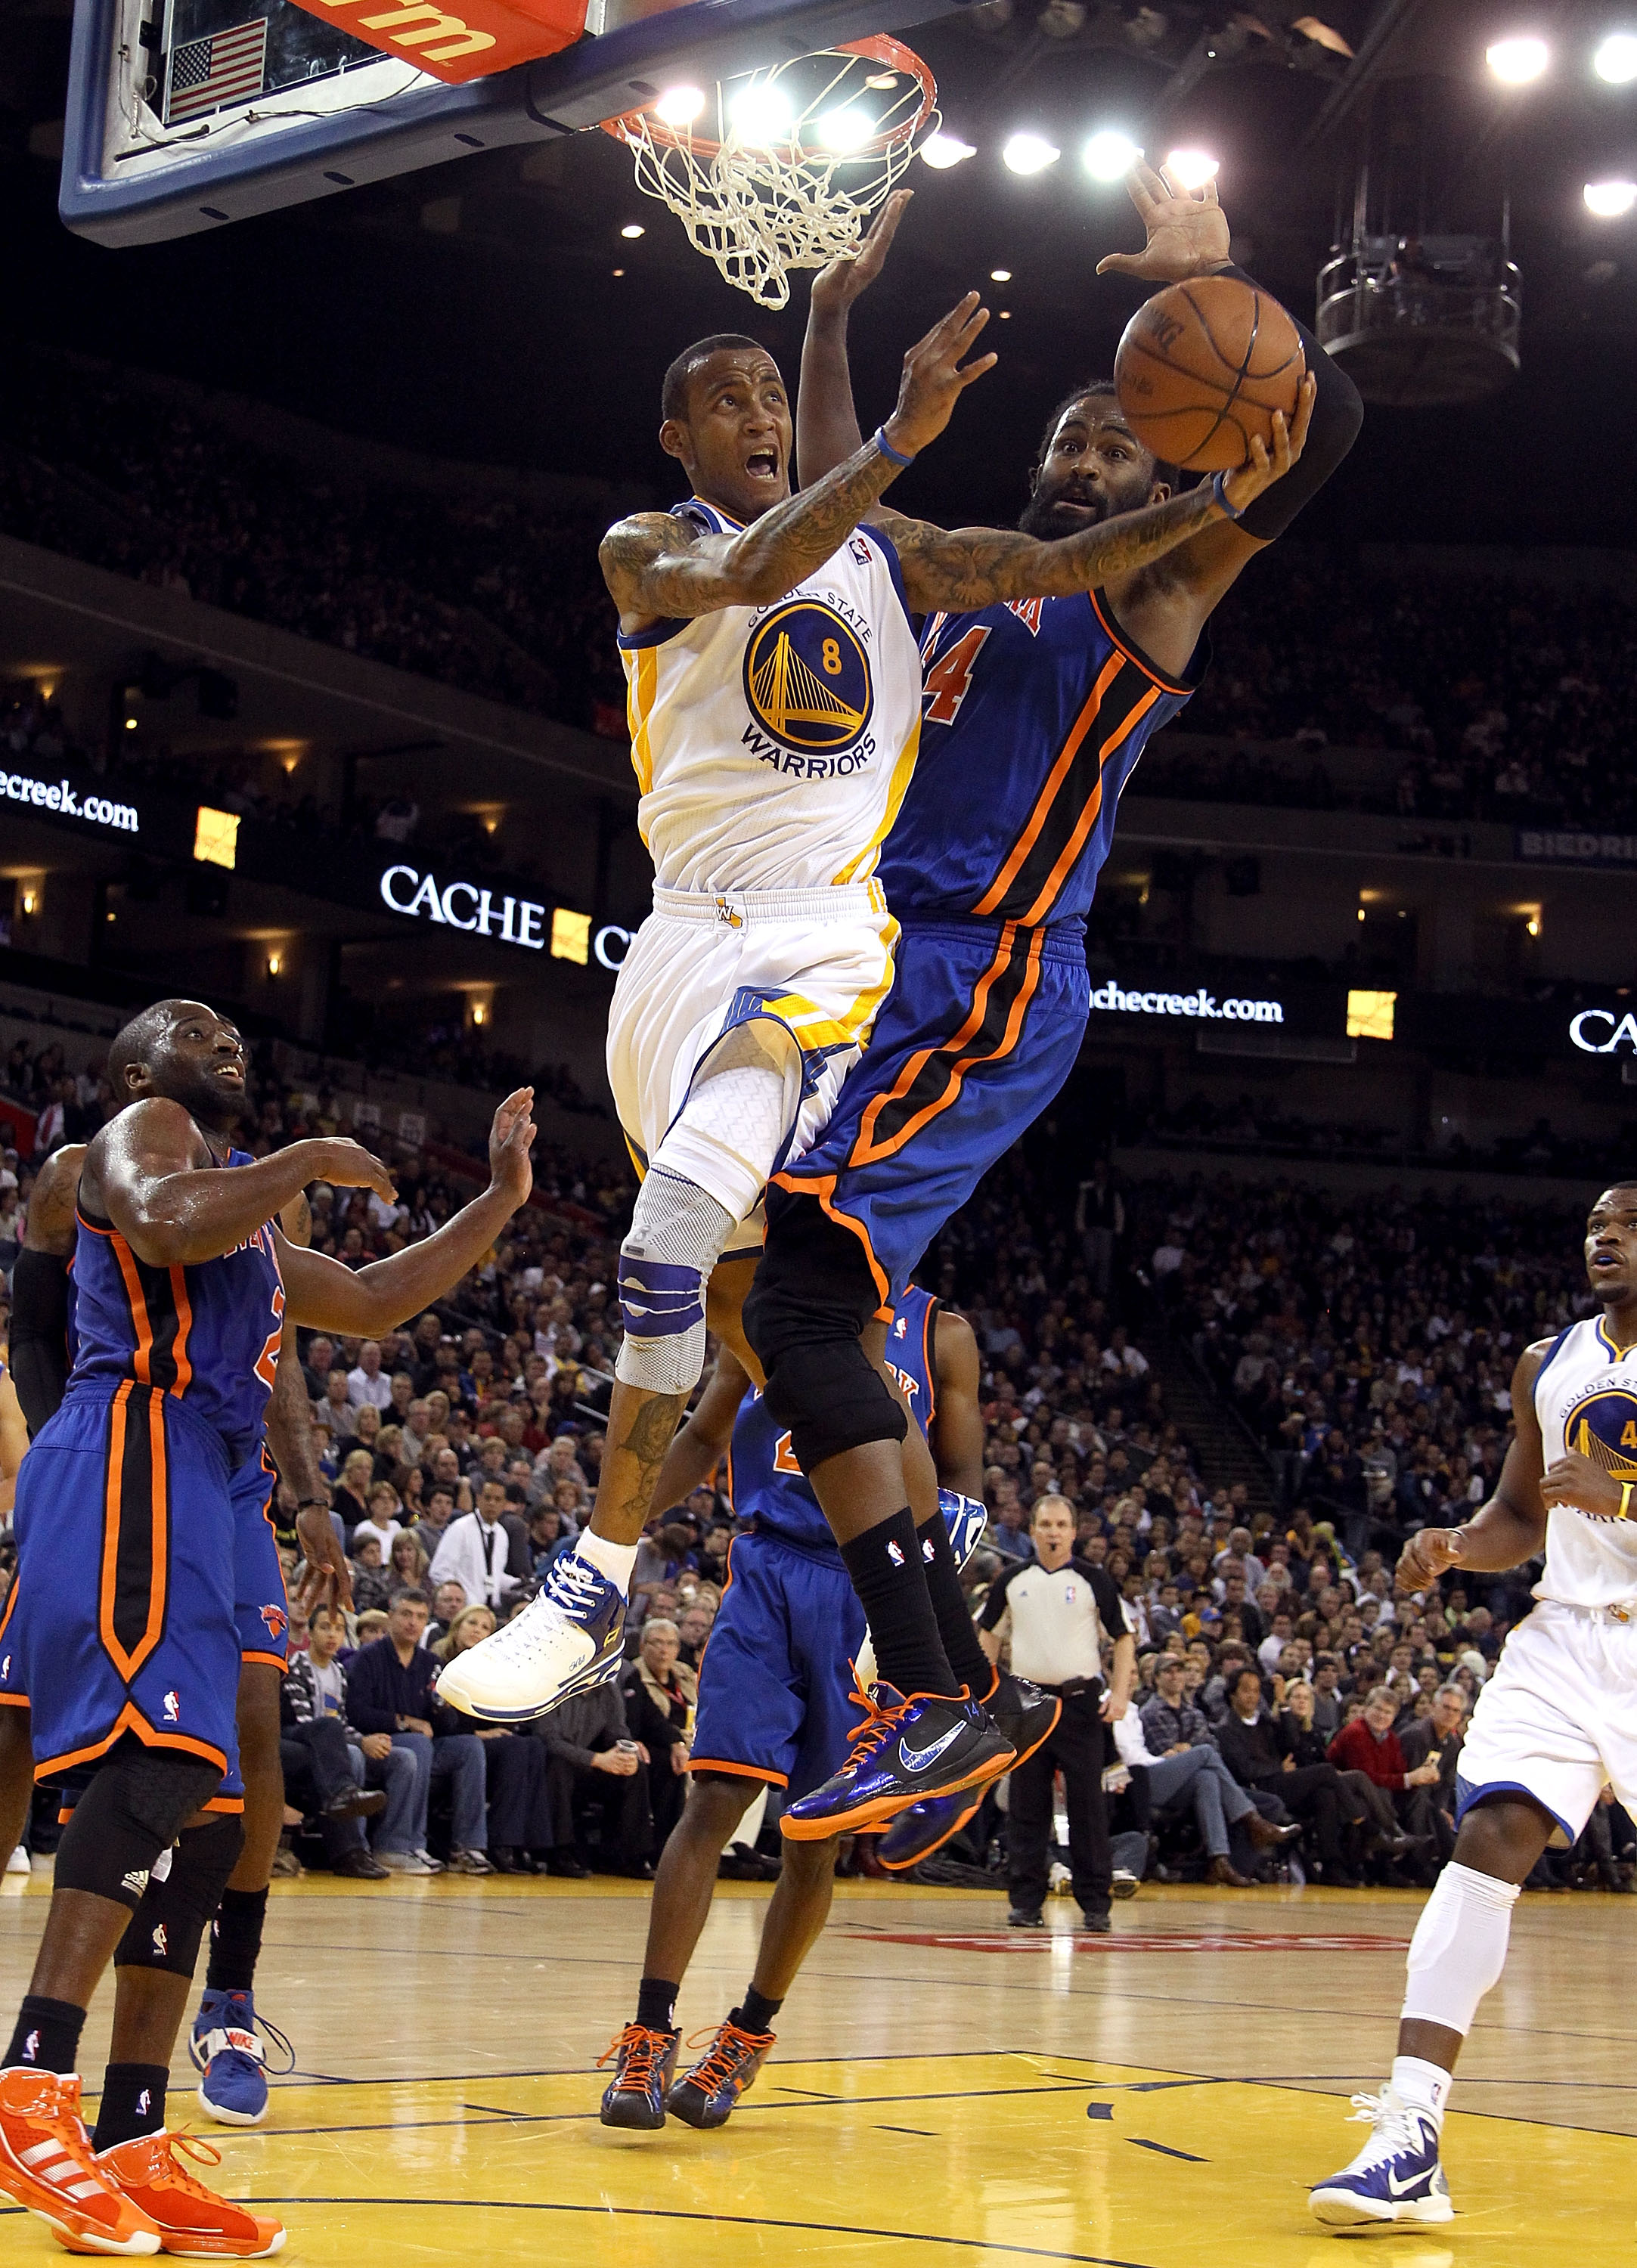 OAKLAND, CA - NOVEMBER 19:  Monta Ellis #8 of the Golden State Warriors goes up for a shot while defended by Ronny Turiaf #14 of the New York Knicks at Oracle Arena on November 19, 2010 in Oakland, California. NOTE TO USER: User expressly acknowledges and